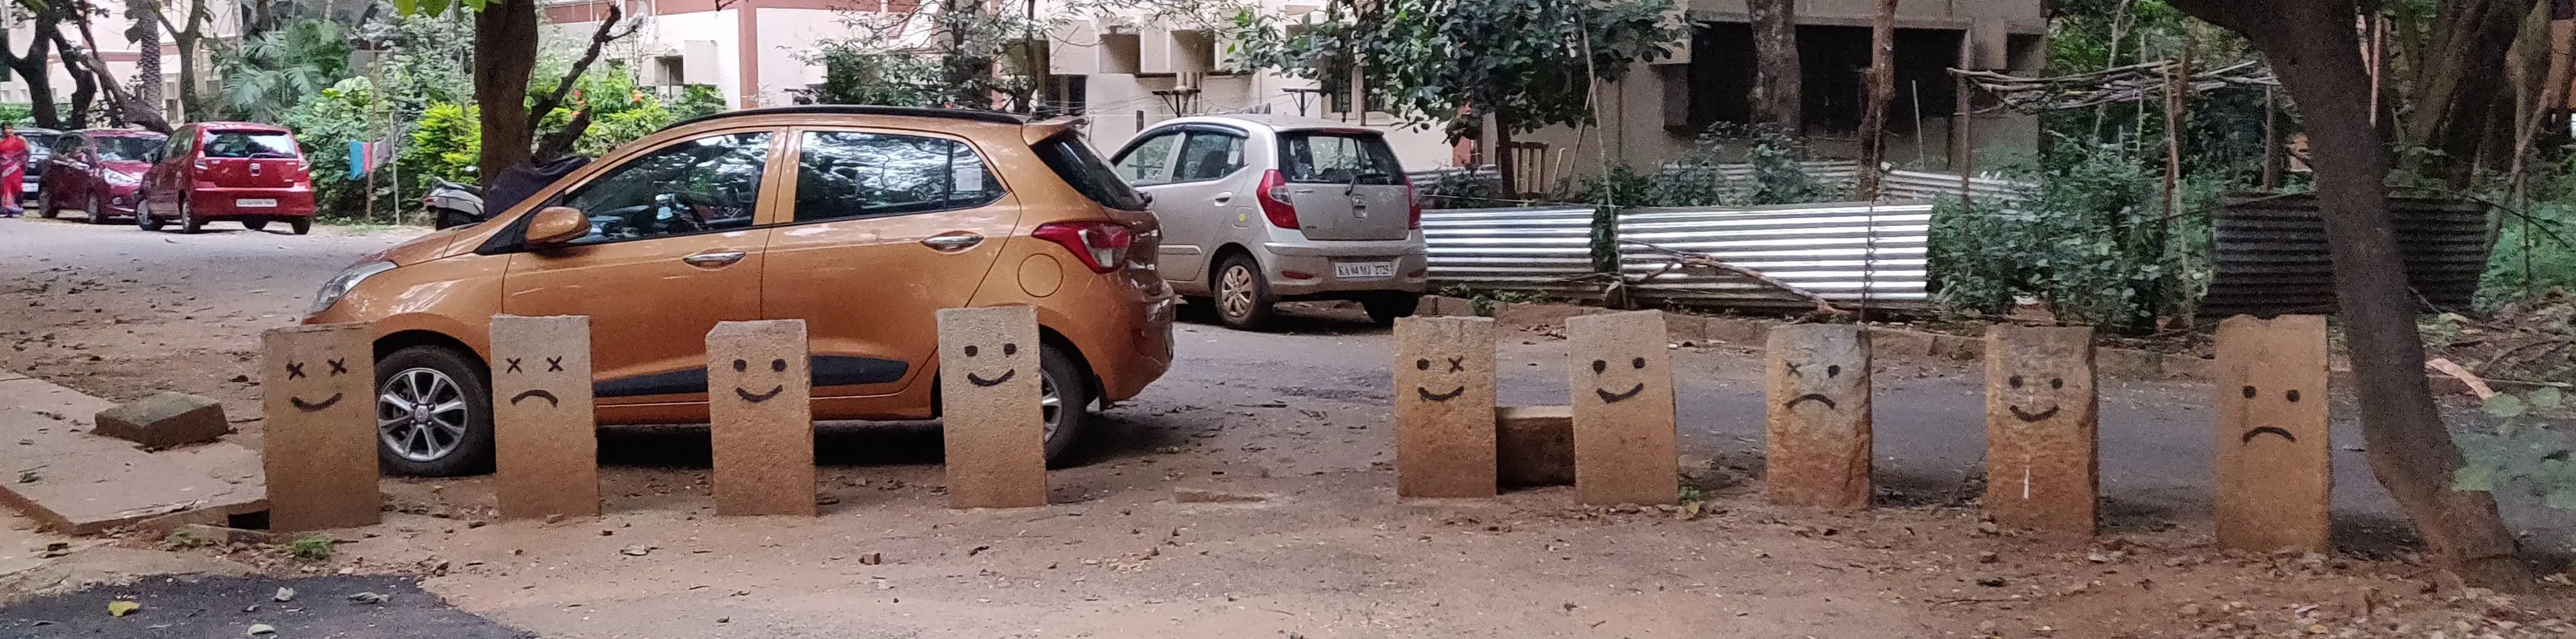 Nine bollards, each with eyes and a mouth spray painted on.